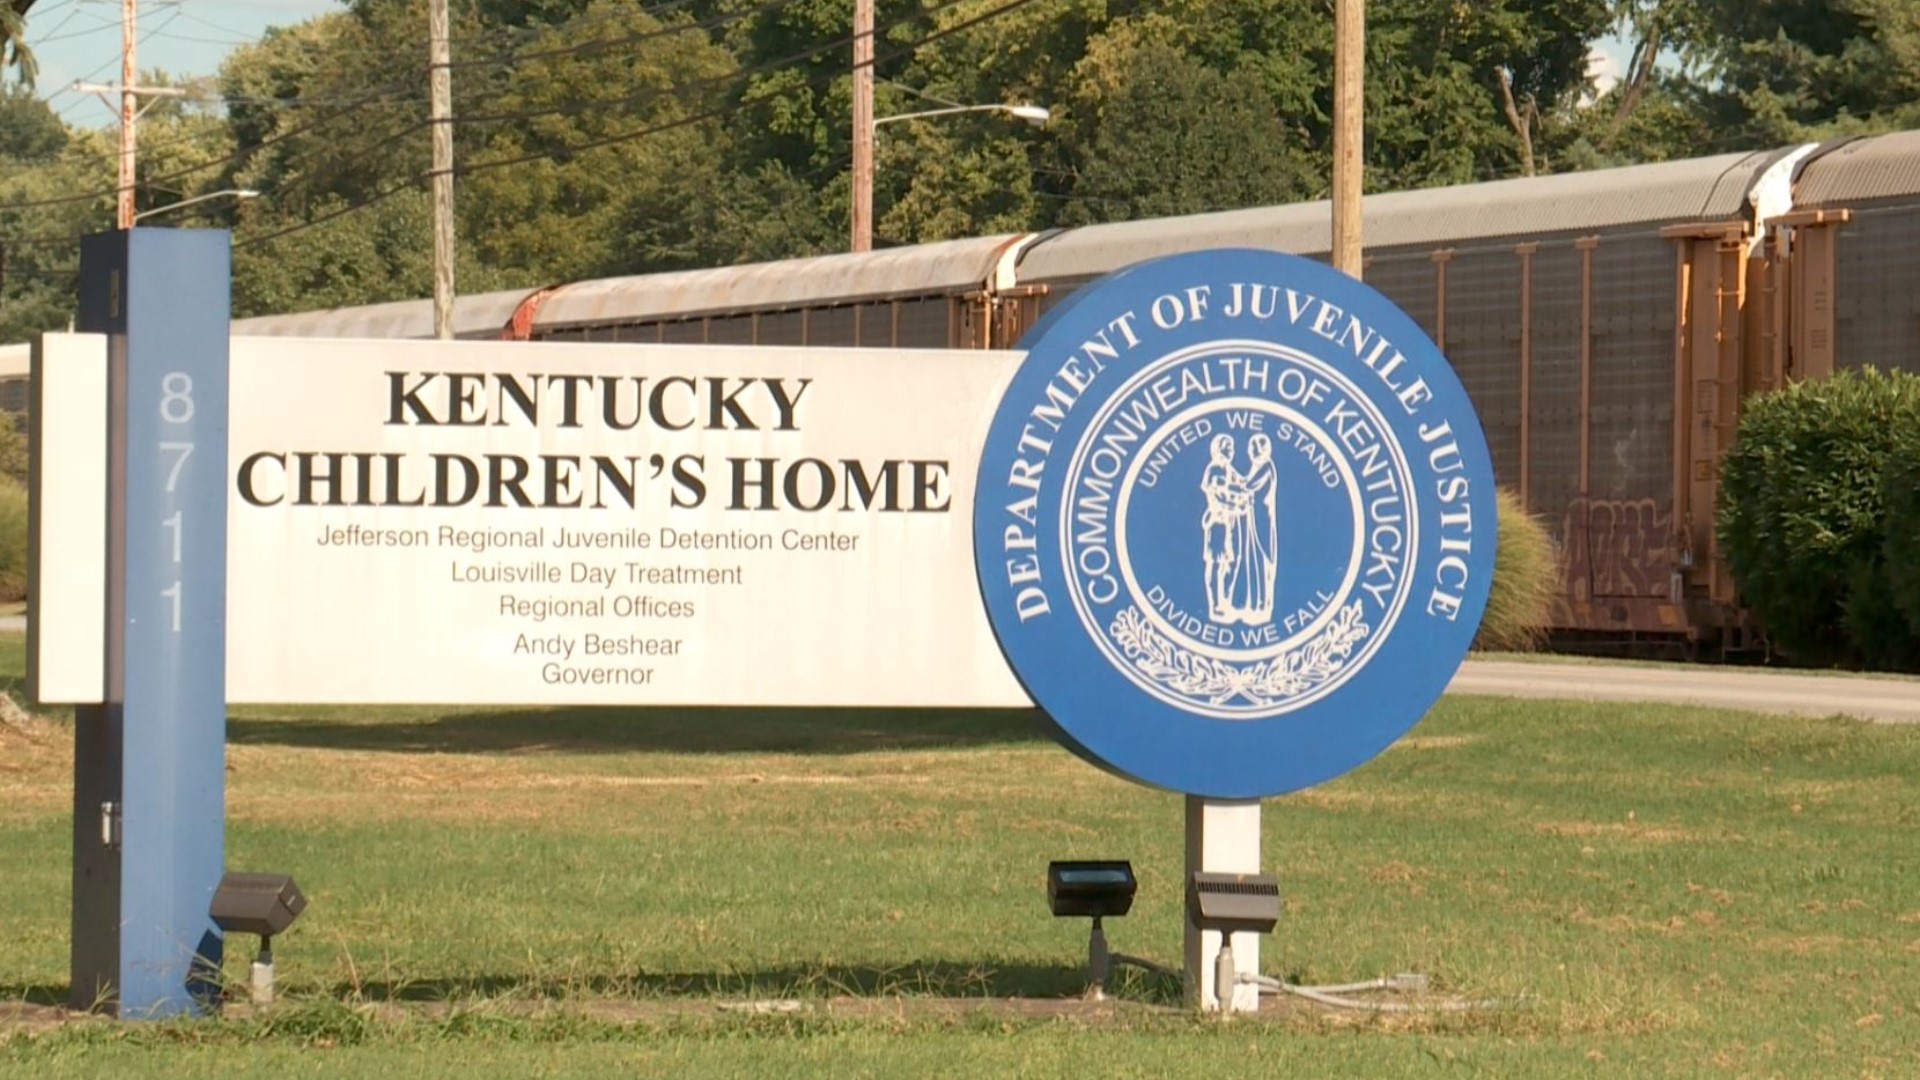 The department has come under criticism for violence that's broken out inside youth detention centers across the state.